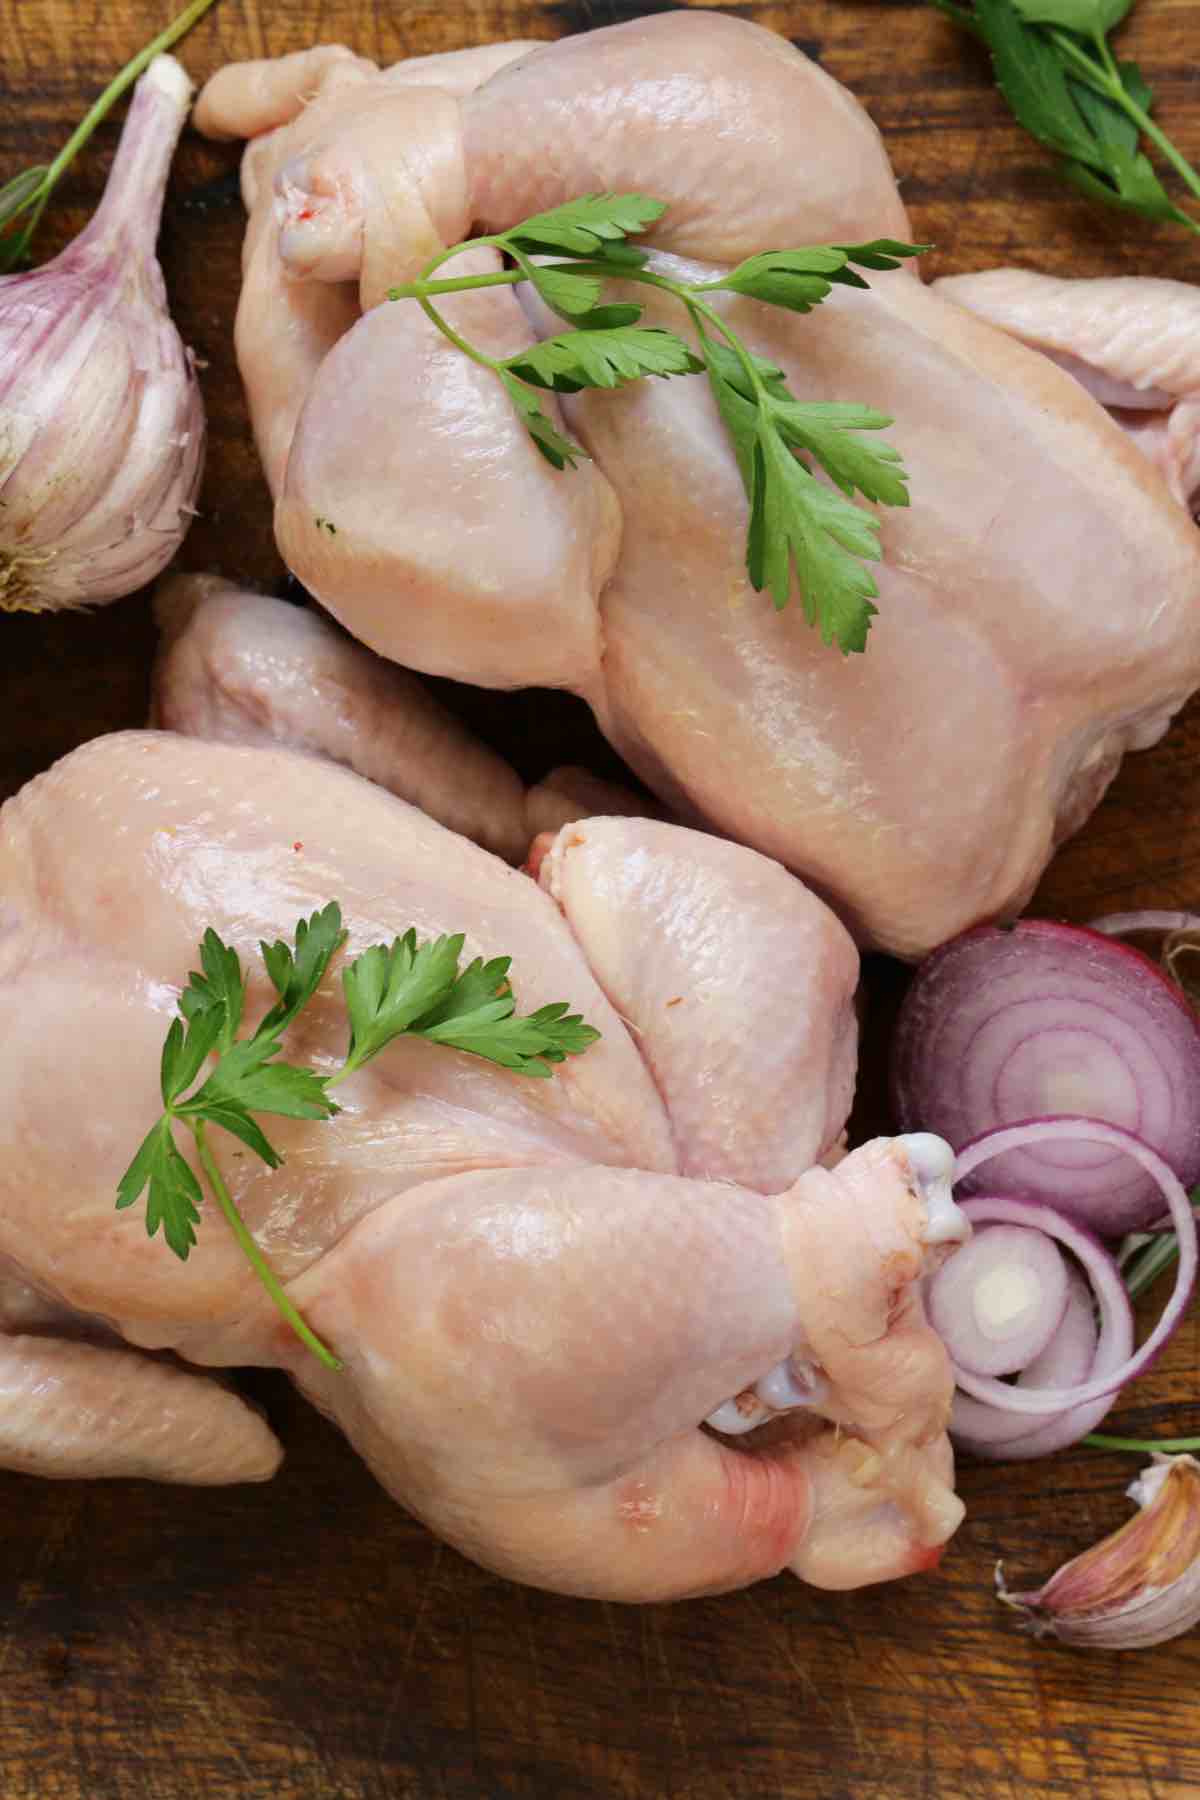 Raw whole chickens with sliced onions, garlic and parsley